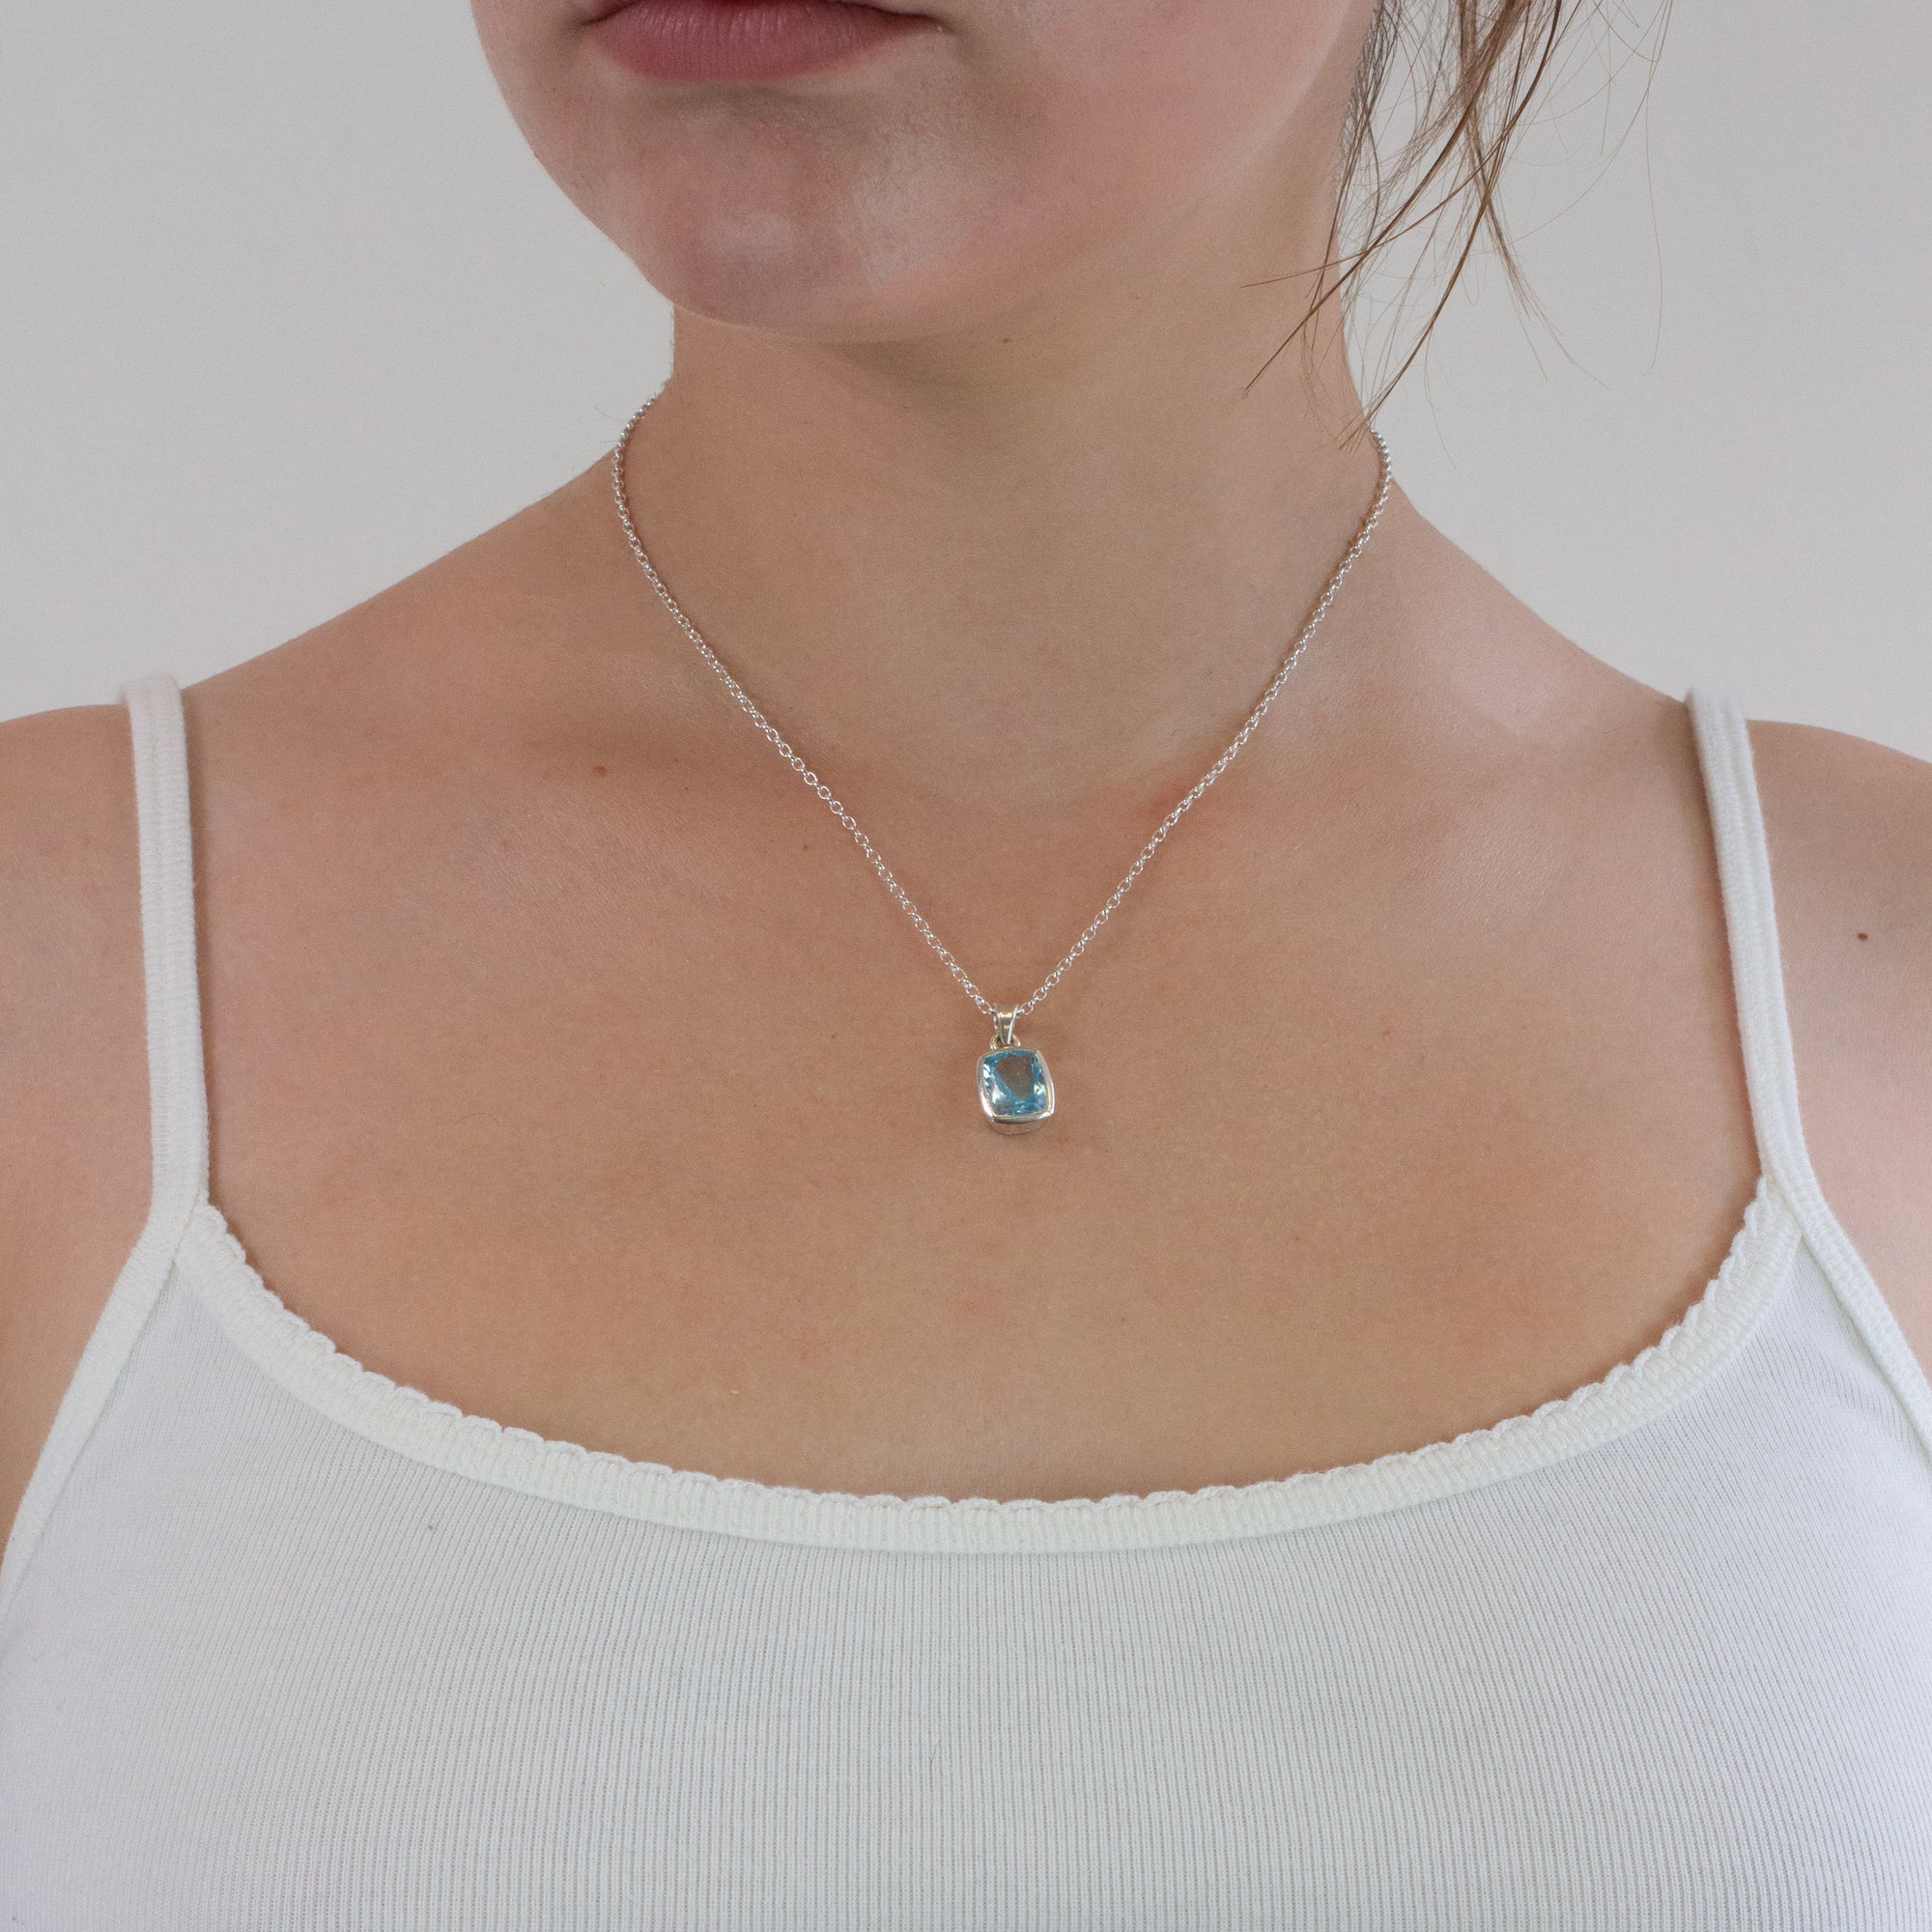 Faceted Rectangle Blue Topaz necklace